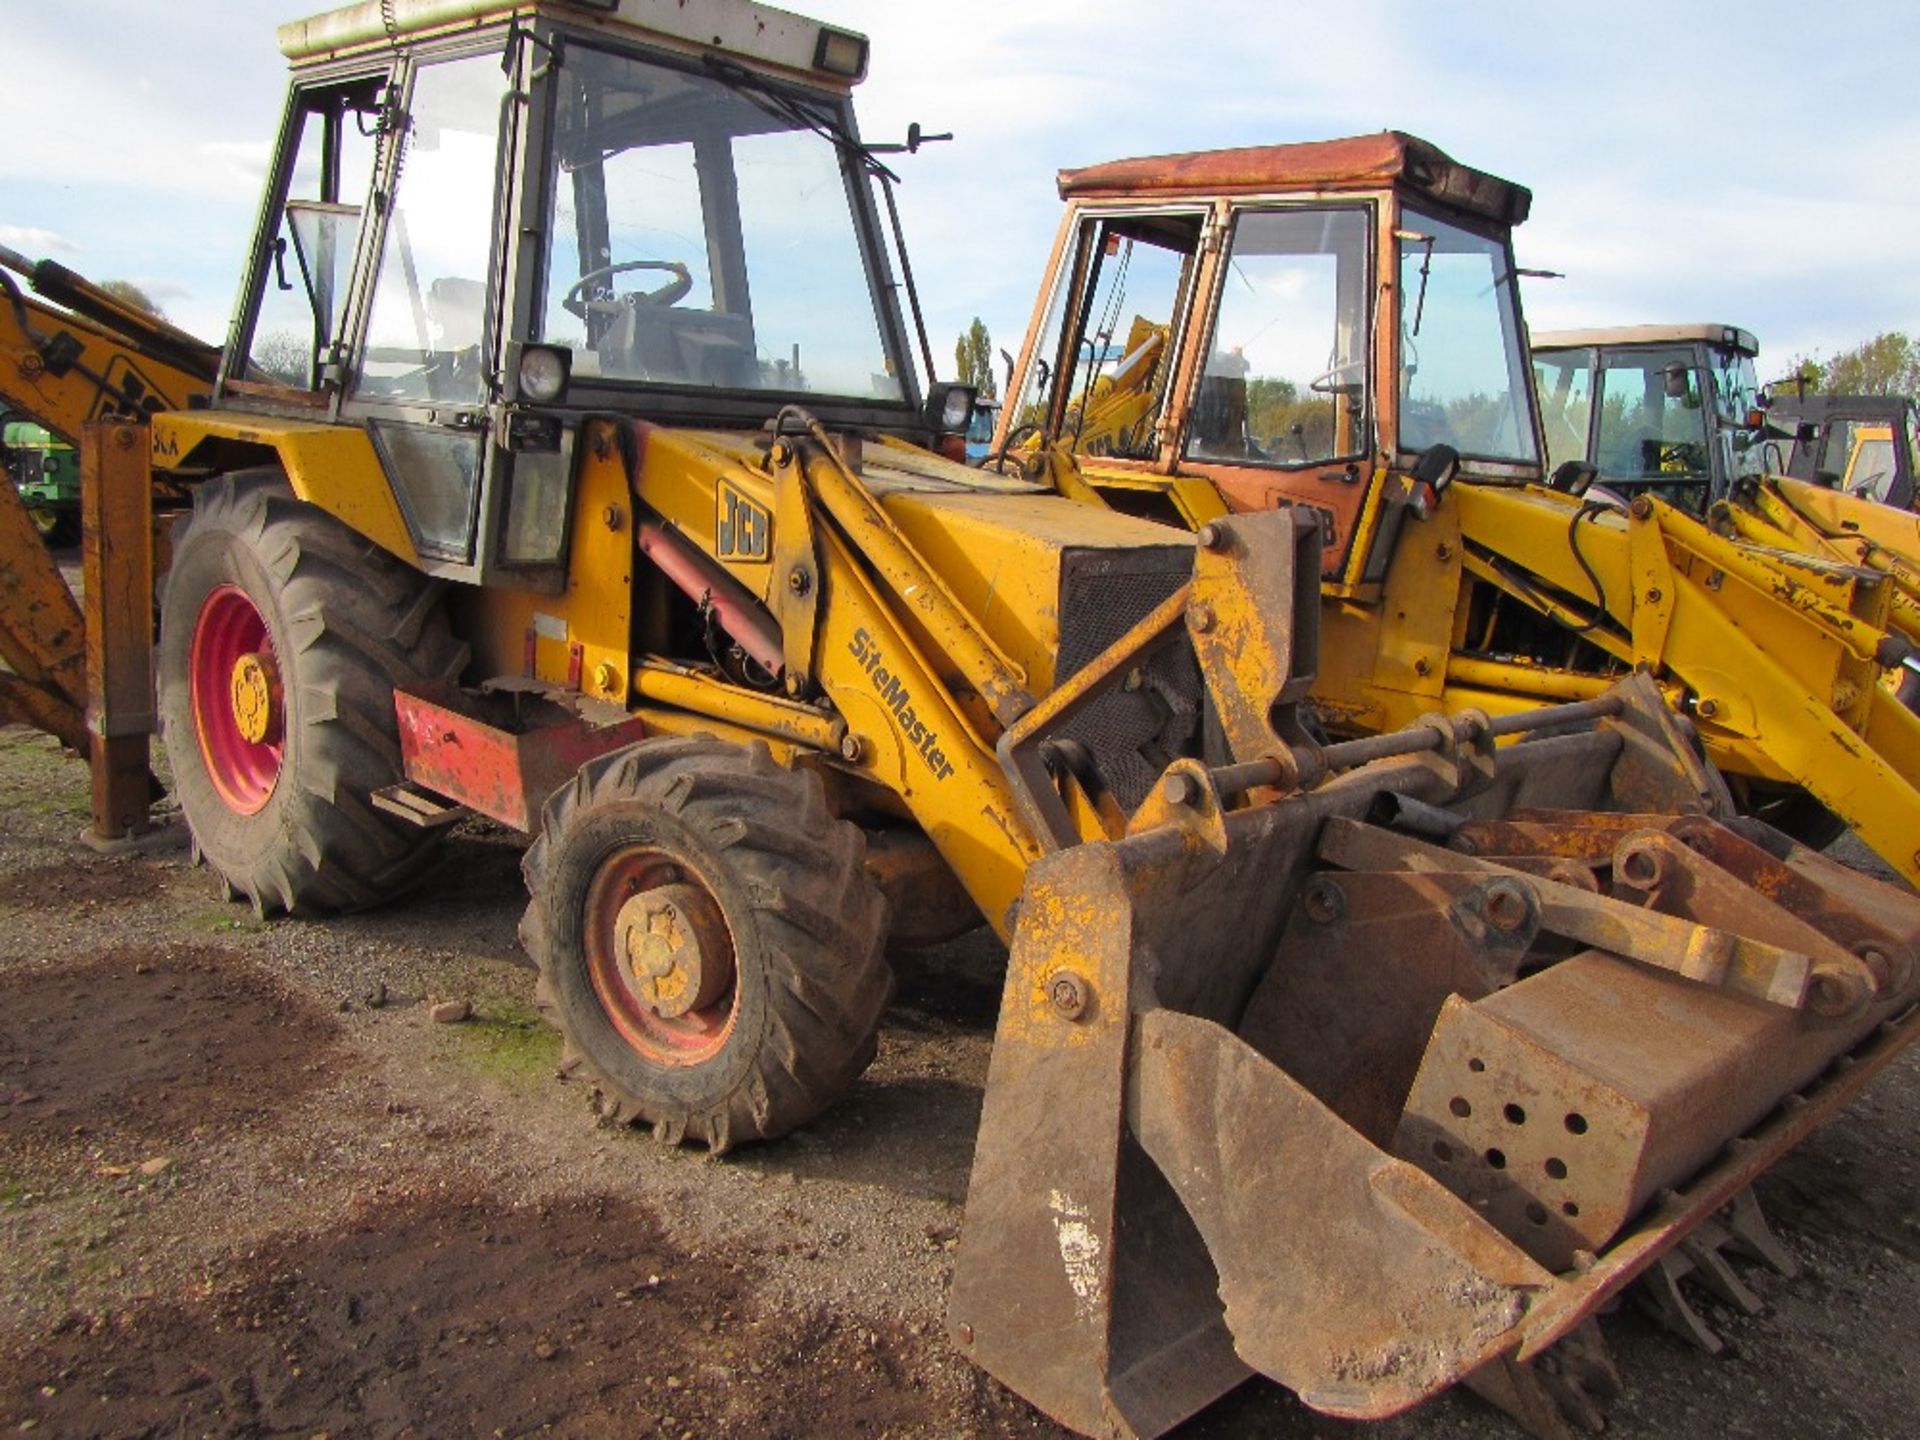 JCB 3CX Project 7 Digger Loader. Gray Cab, 5 Stud Rear Axle, Full set of Rear Buckets, 4 in 1 Dig - Image 2 of 4